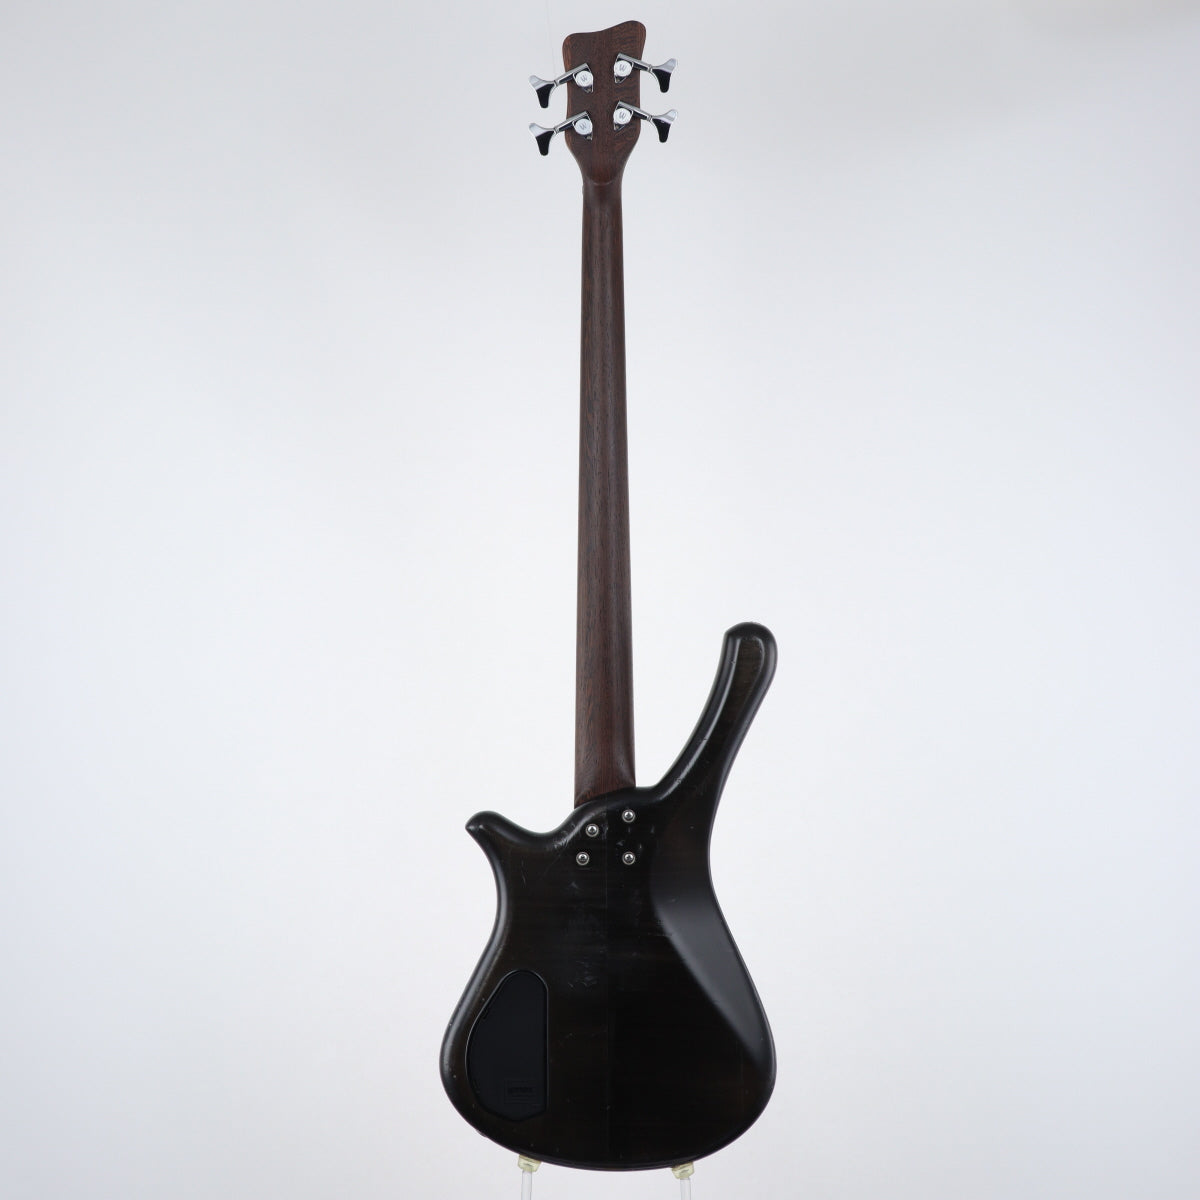 [SN L-053895-98] USED Warwick / Fortress One 4Strings Transparent Black [11]